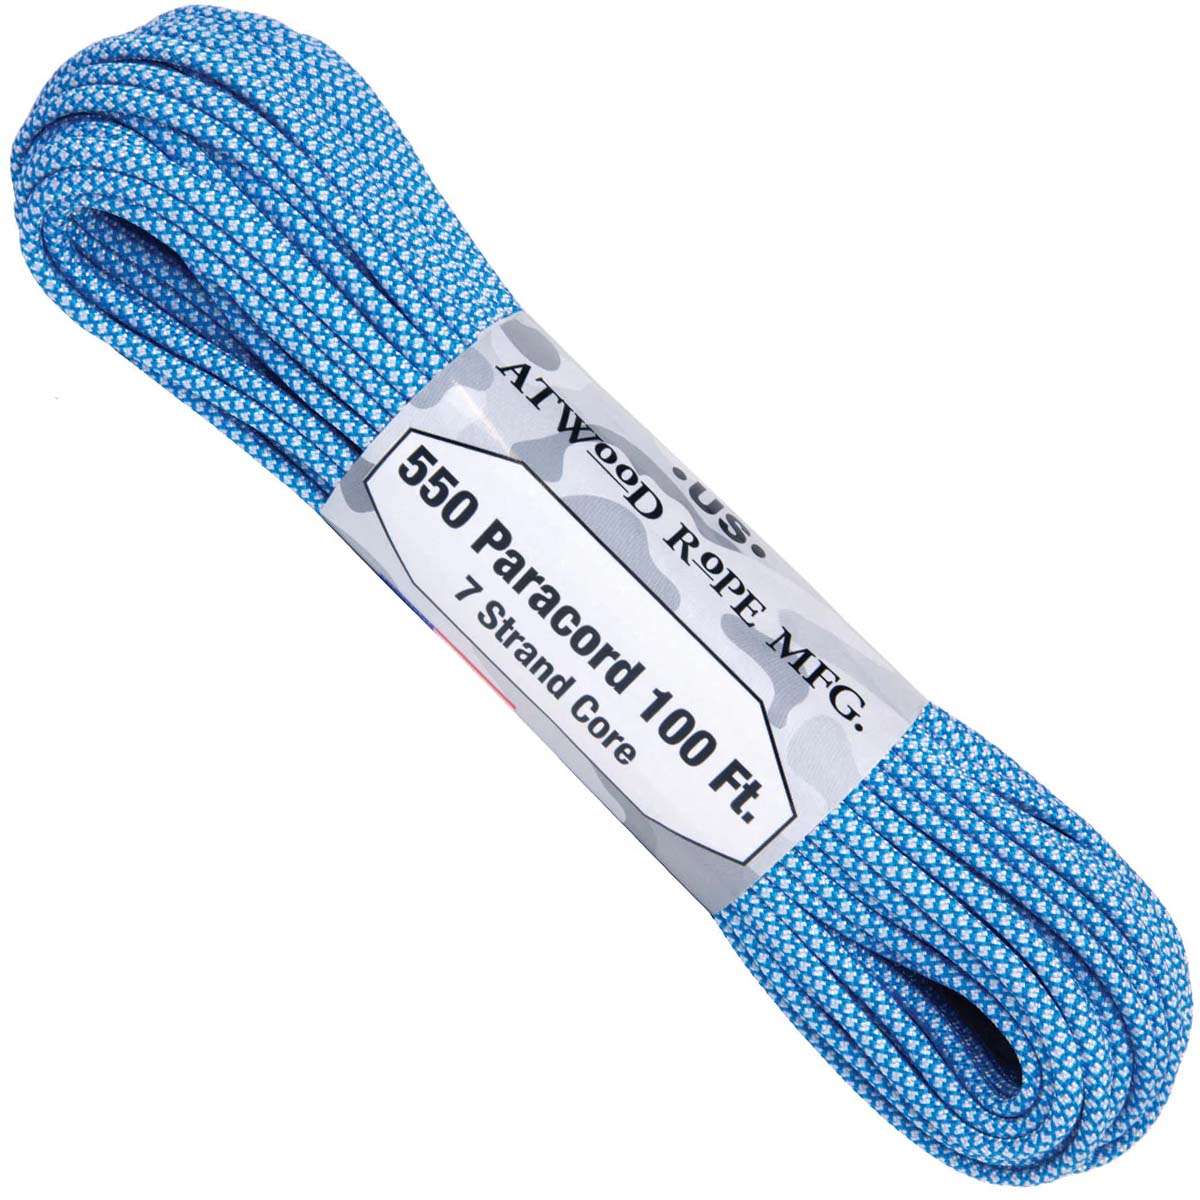 Atwood Paracord 550 7 Strand - 30m Lengths